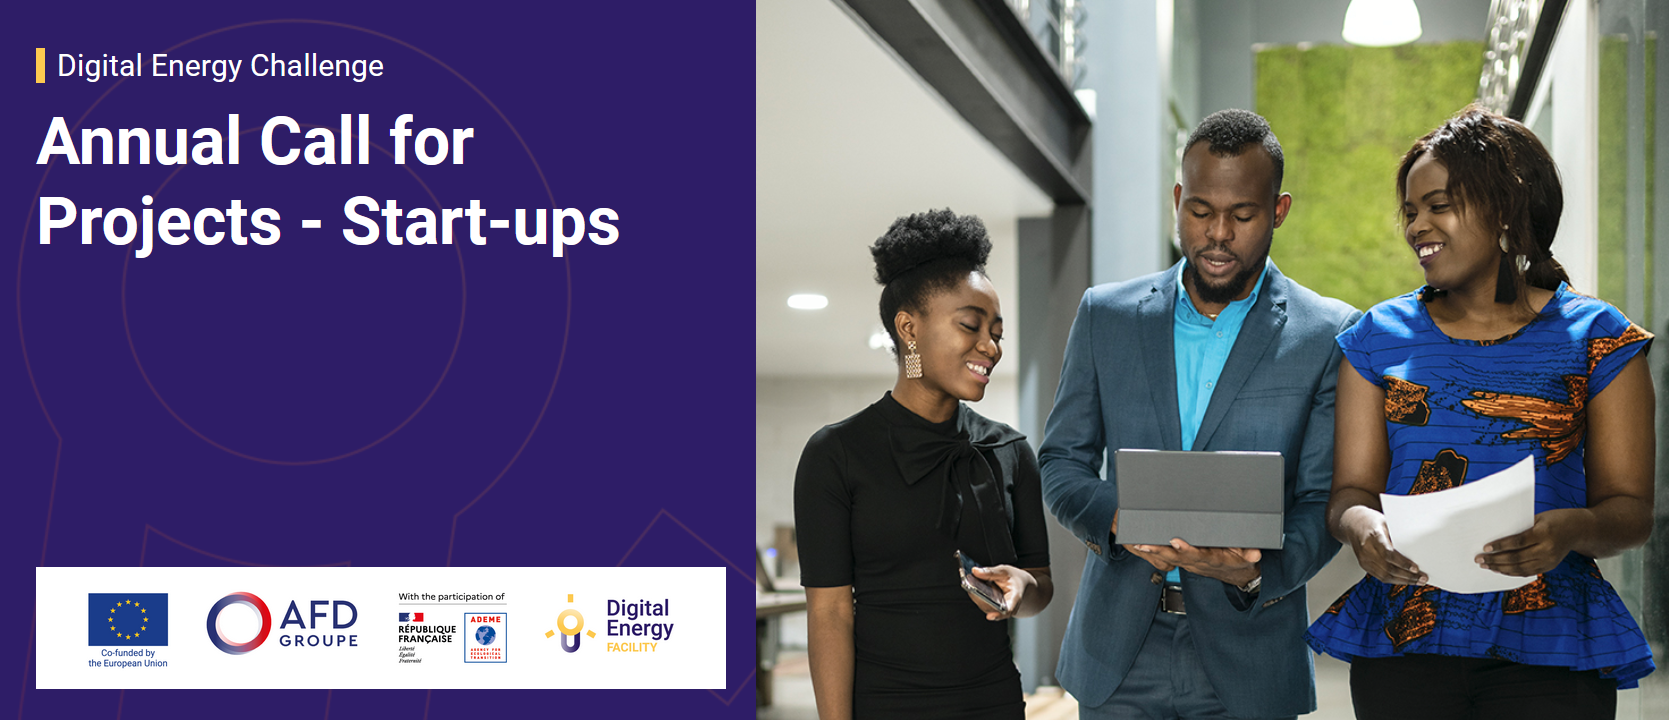 Digital Energy Challenge Annual Call for Projects – Start-ups